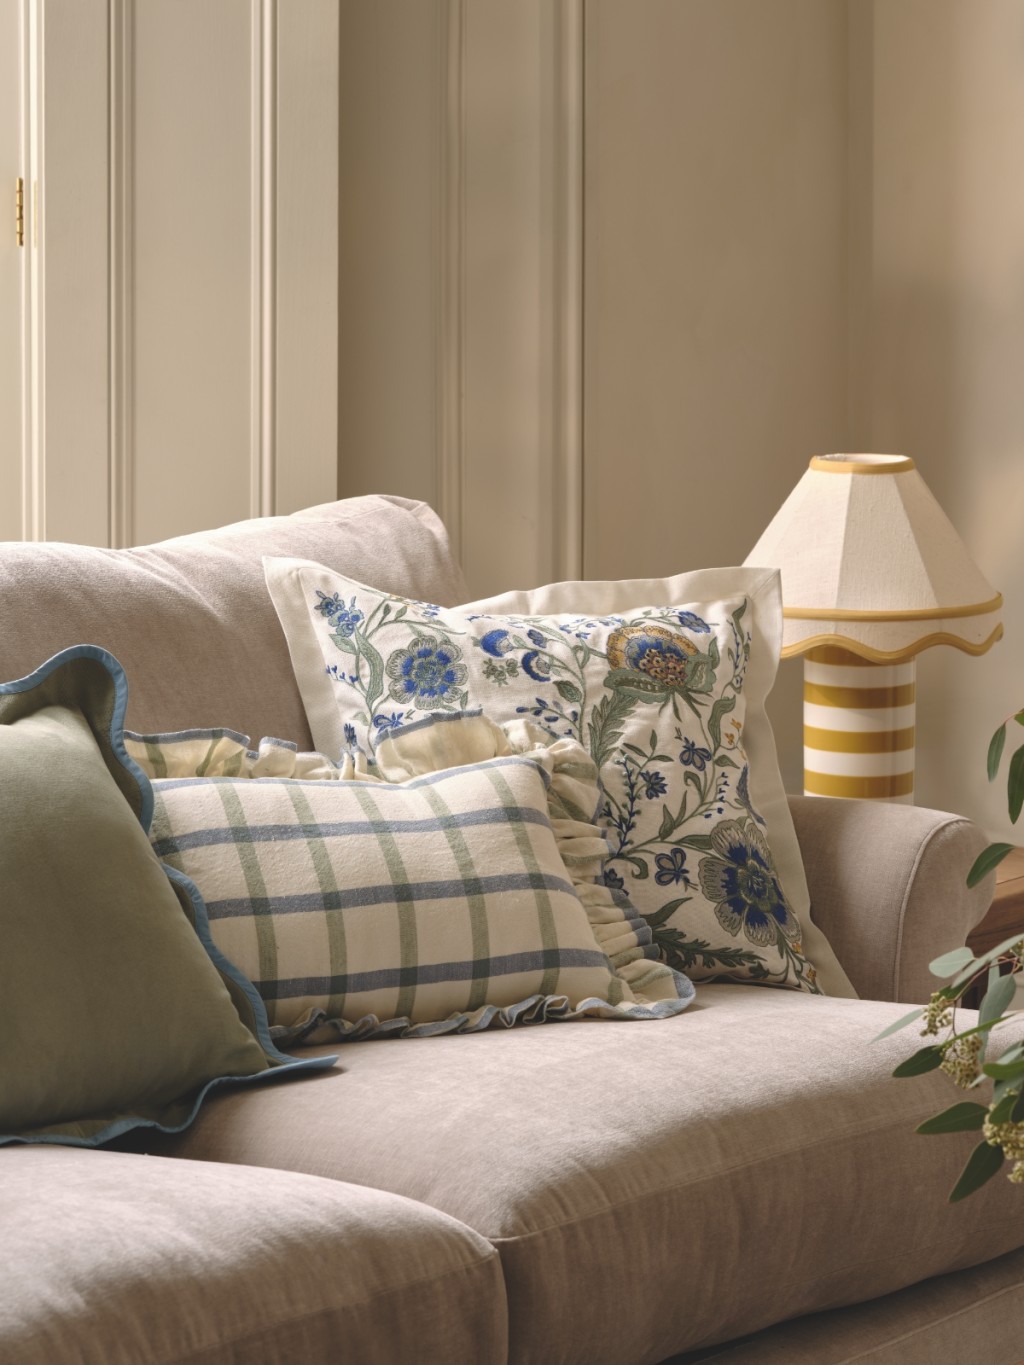 Light grey sofa with cushions in plain, checked and floral designs. Shop the Classic Reimagined trend